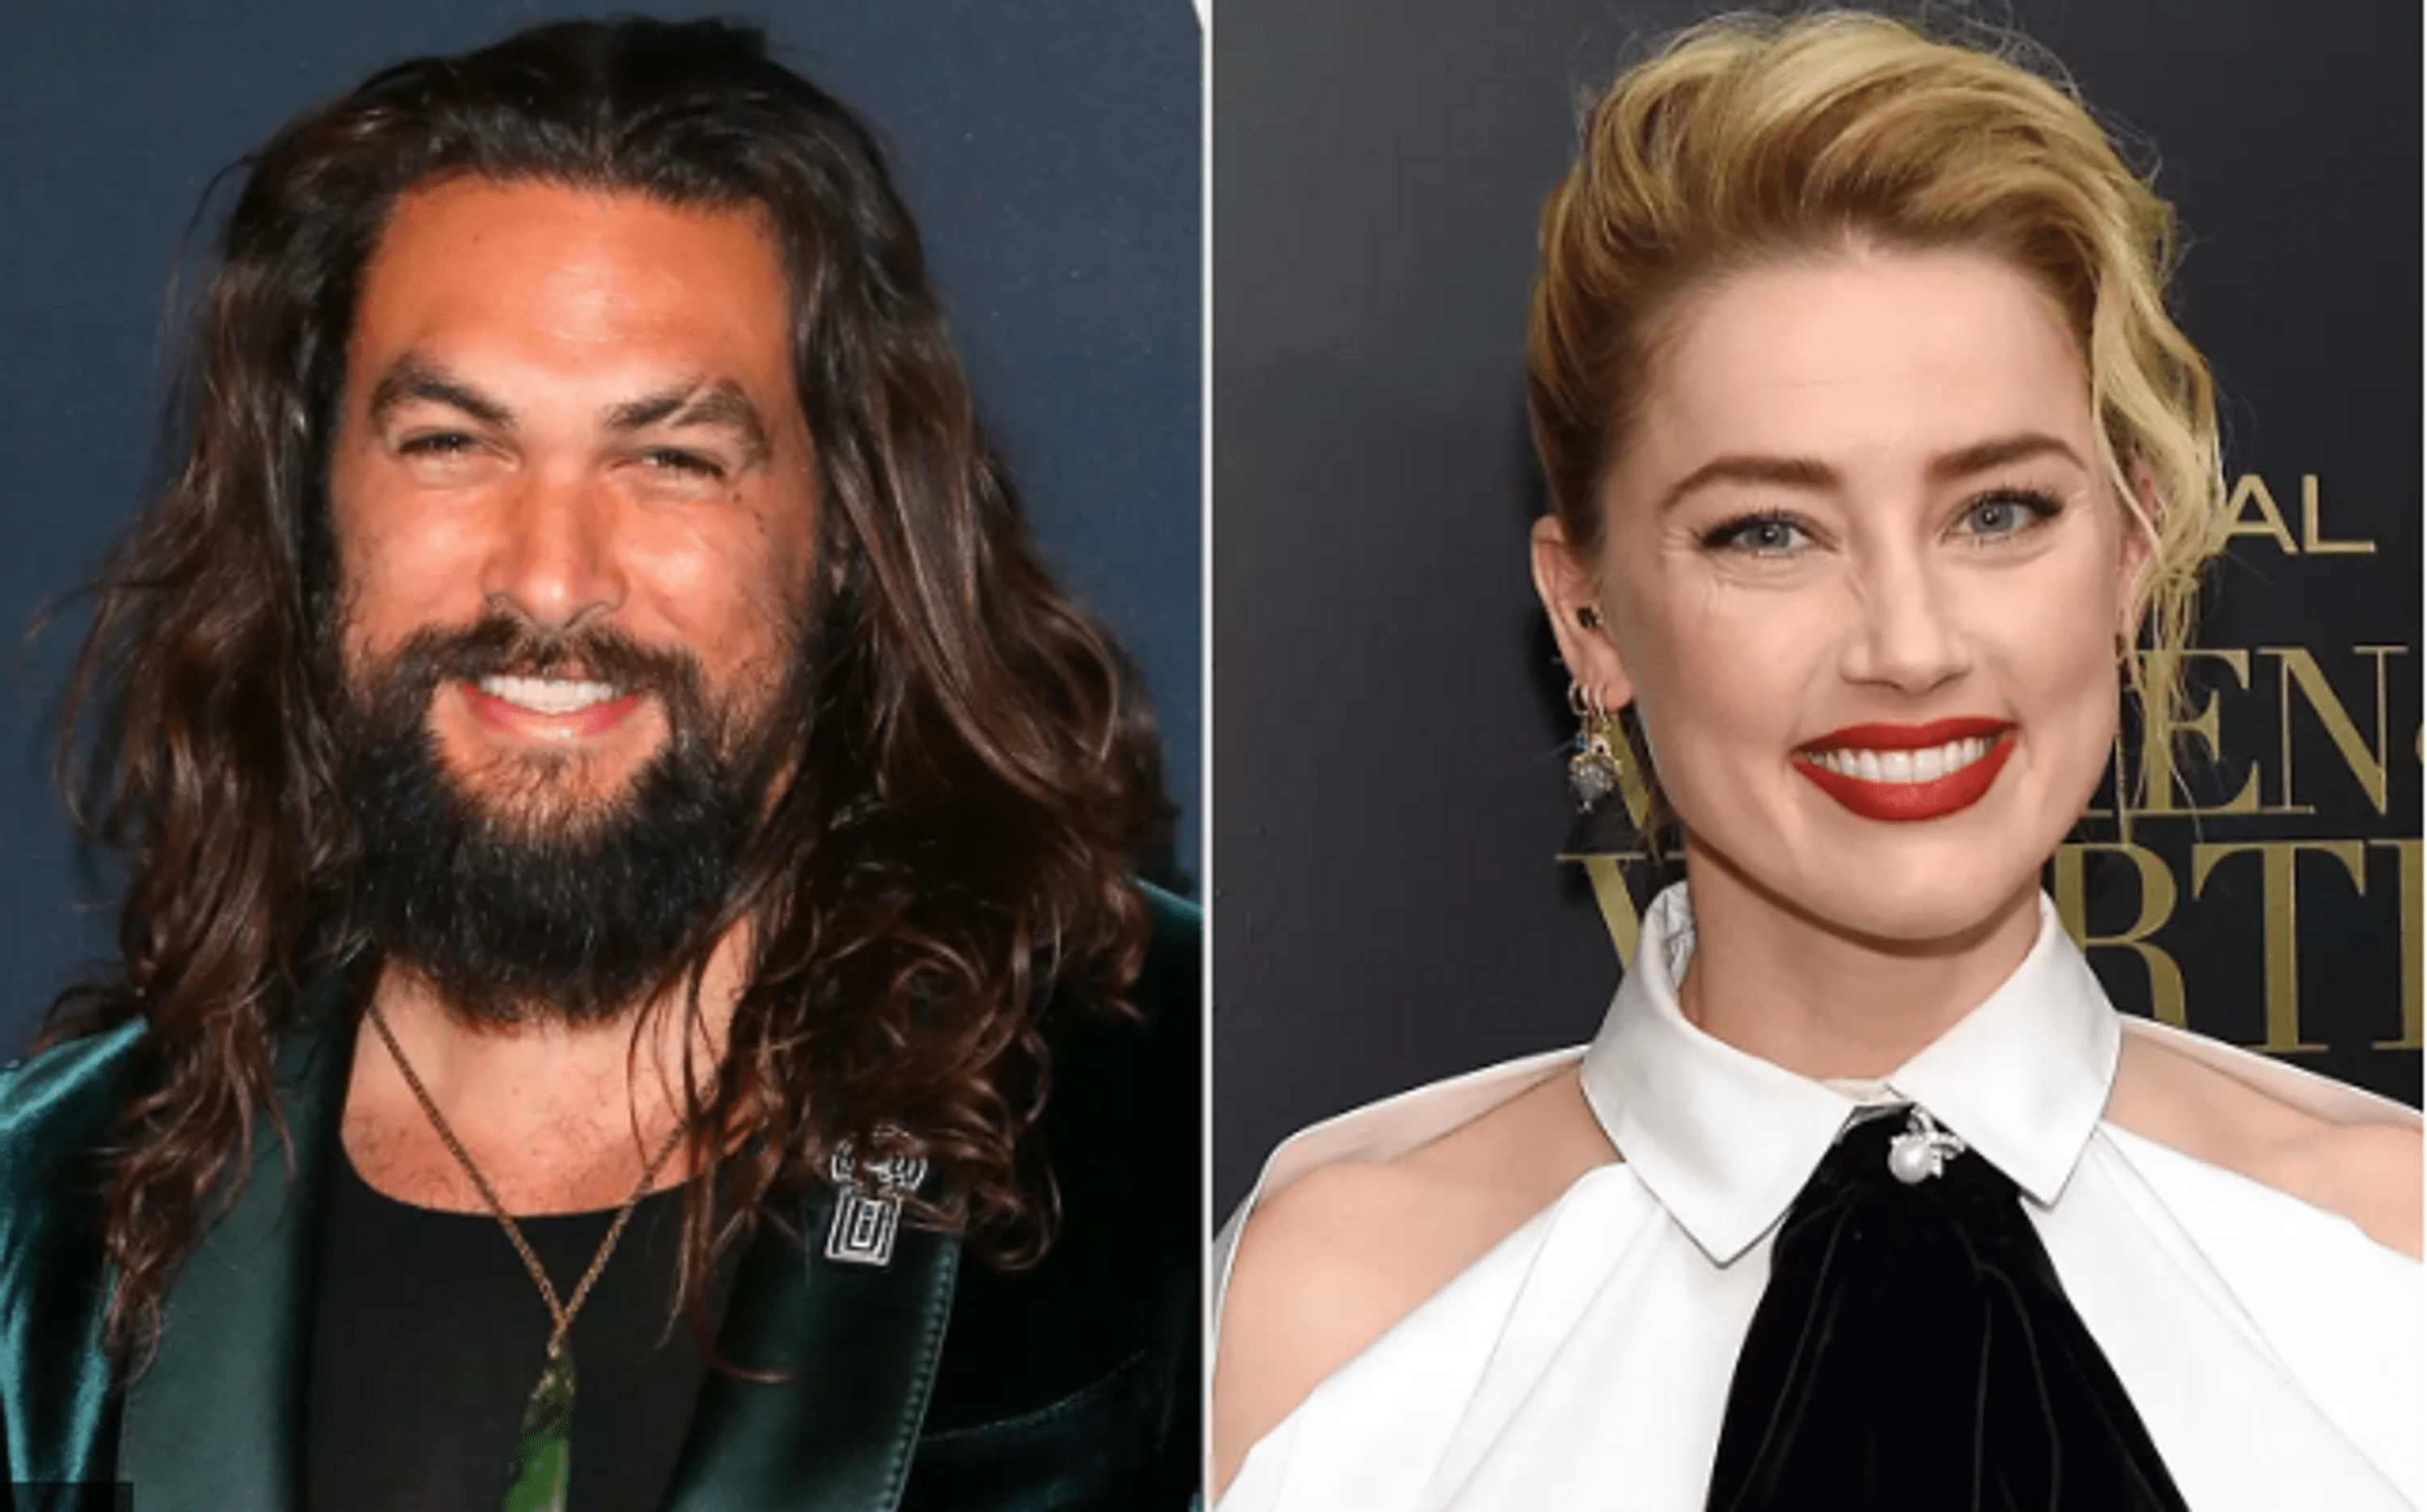 Amber Heard's agent was told that the reason for cutting her role in Aquaman 2 was the 'lack of chemistry' with Jason Momoa